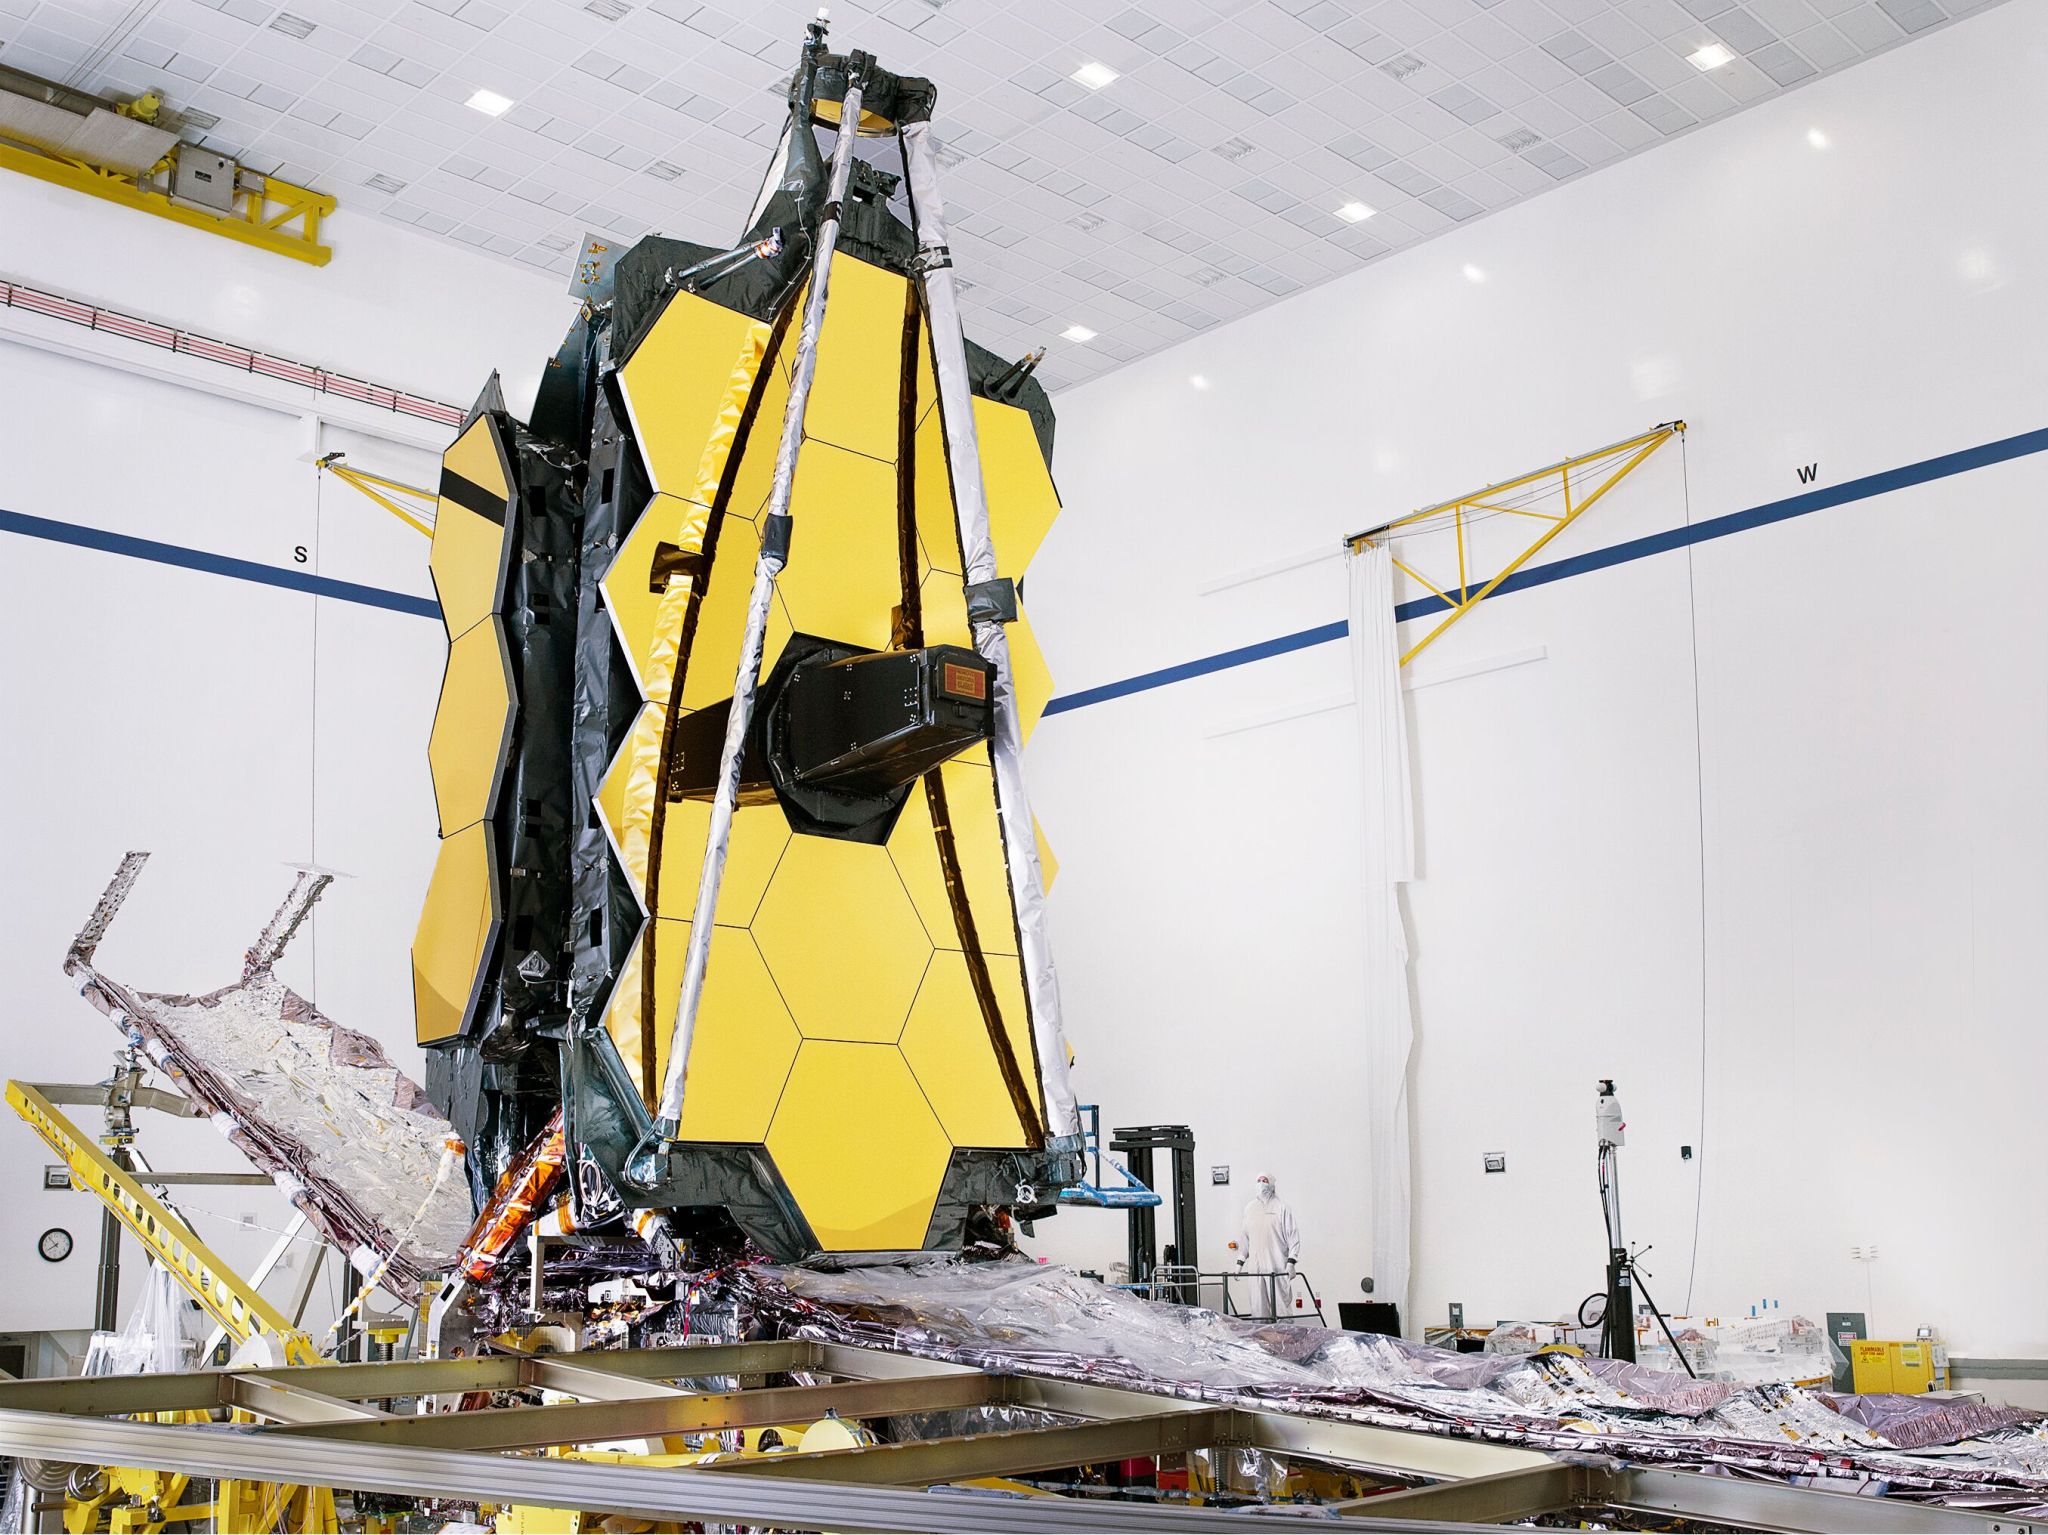 Fully assembled James Webb Space Telescope with its sunshield and unitized pallet structures (UPSs) that fold up.